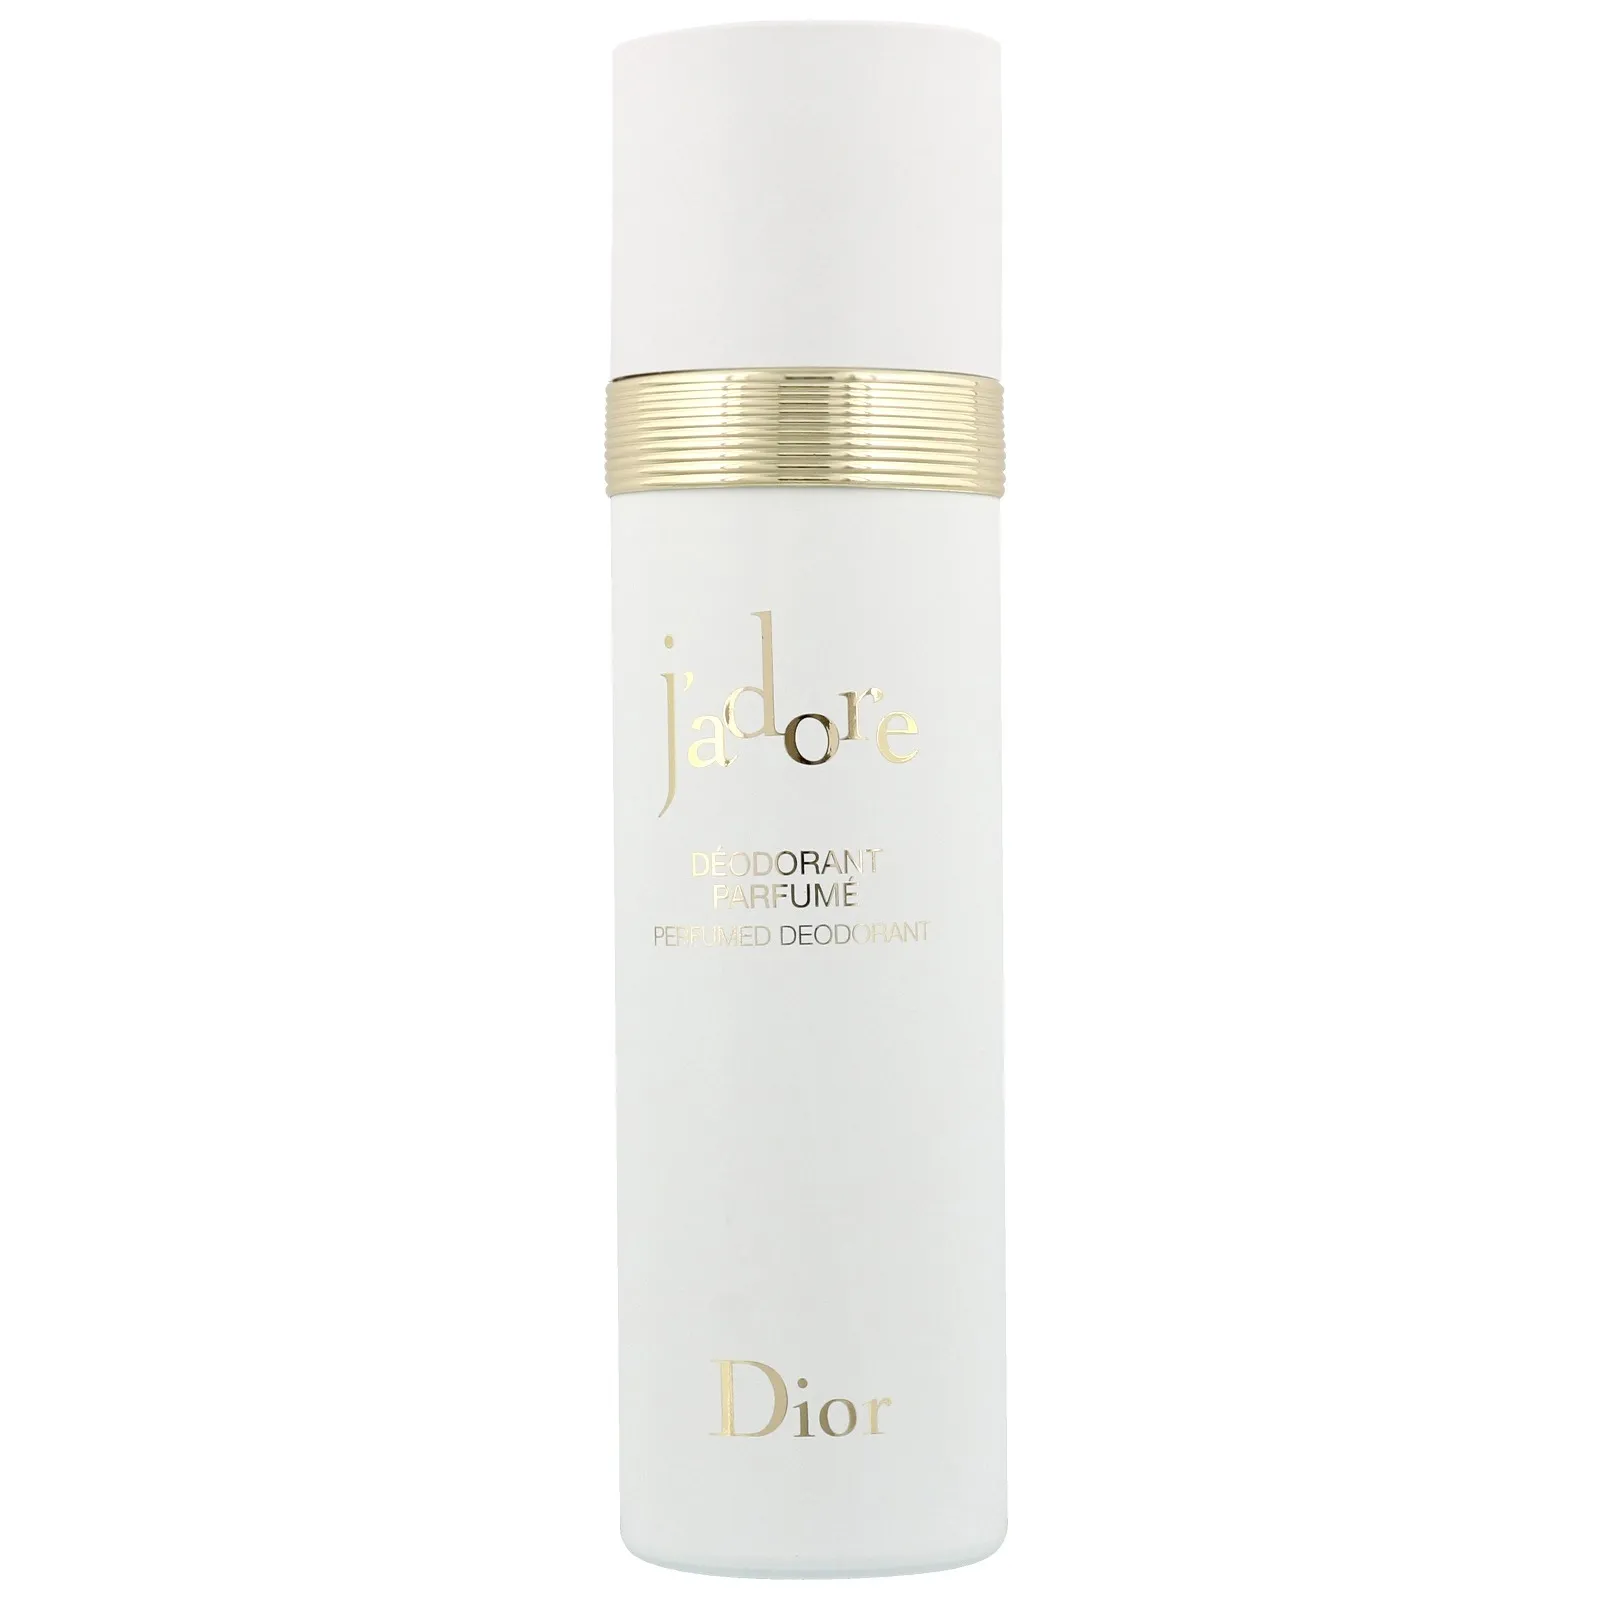 J'adore Perfumed Deodorant Spray by Dior, one of the best French designer deodorants.